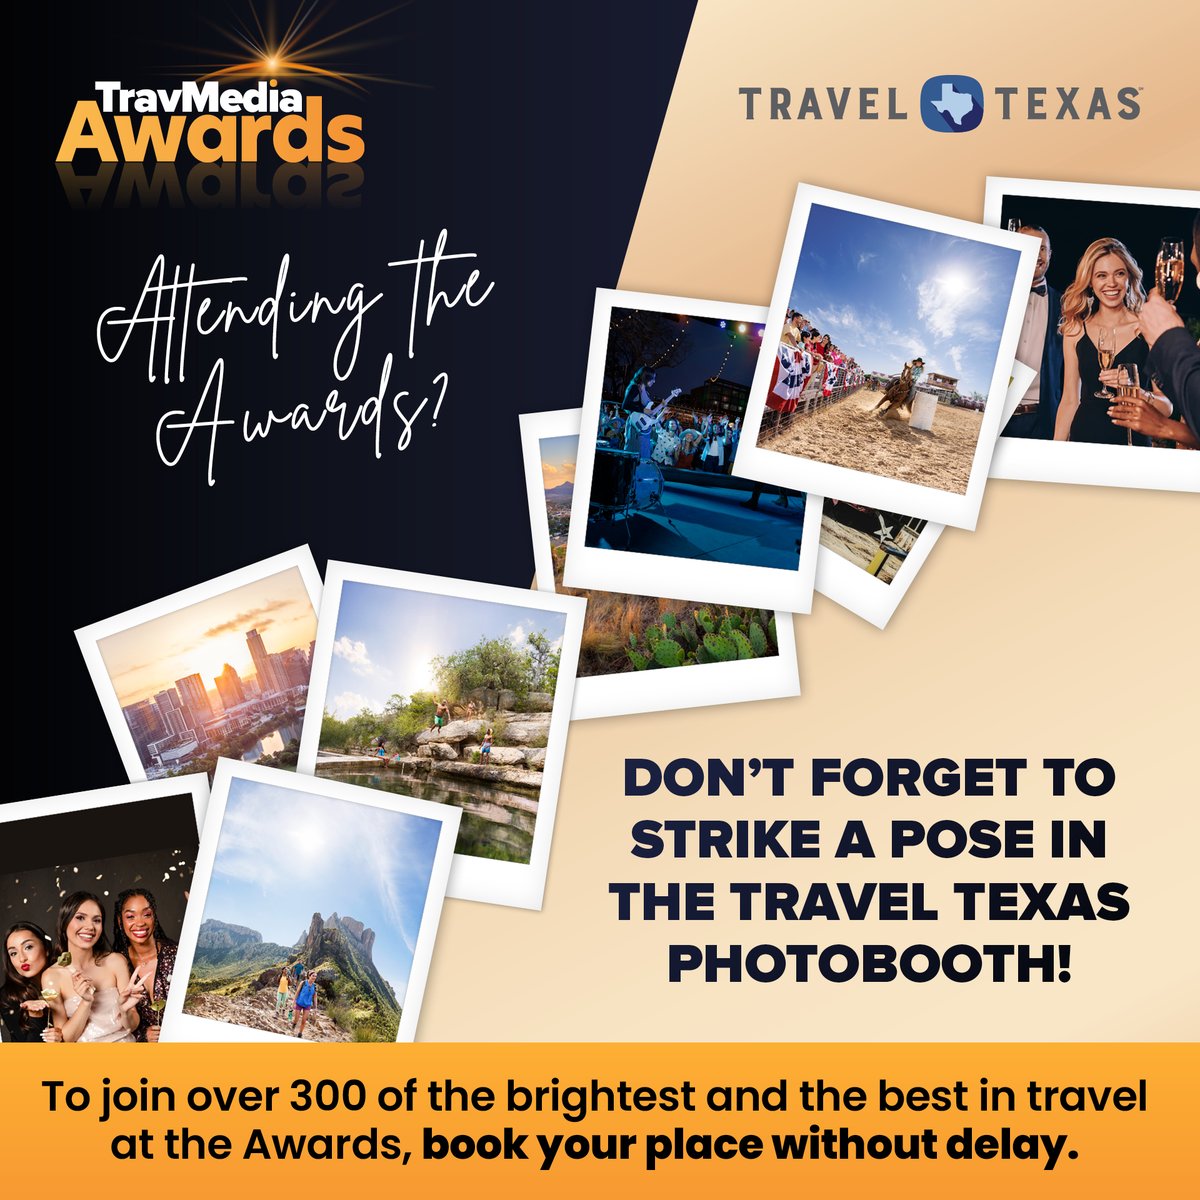 TravMedia Awards 2024: Meet the Sponsors Today, we’re focusing on Travel Texas who have snapped up the Photobooth sponsorship at the TravMedia Awards. A huge thanks to this incredible destination for their support this year! Come and strike a pose y’all – and immortalise your…